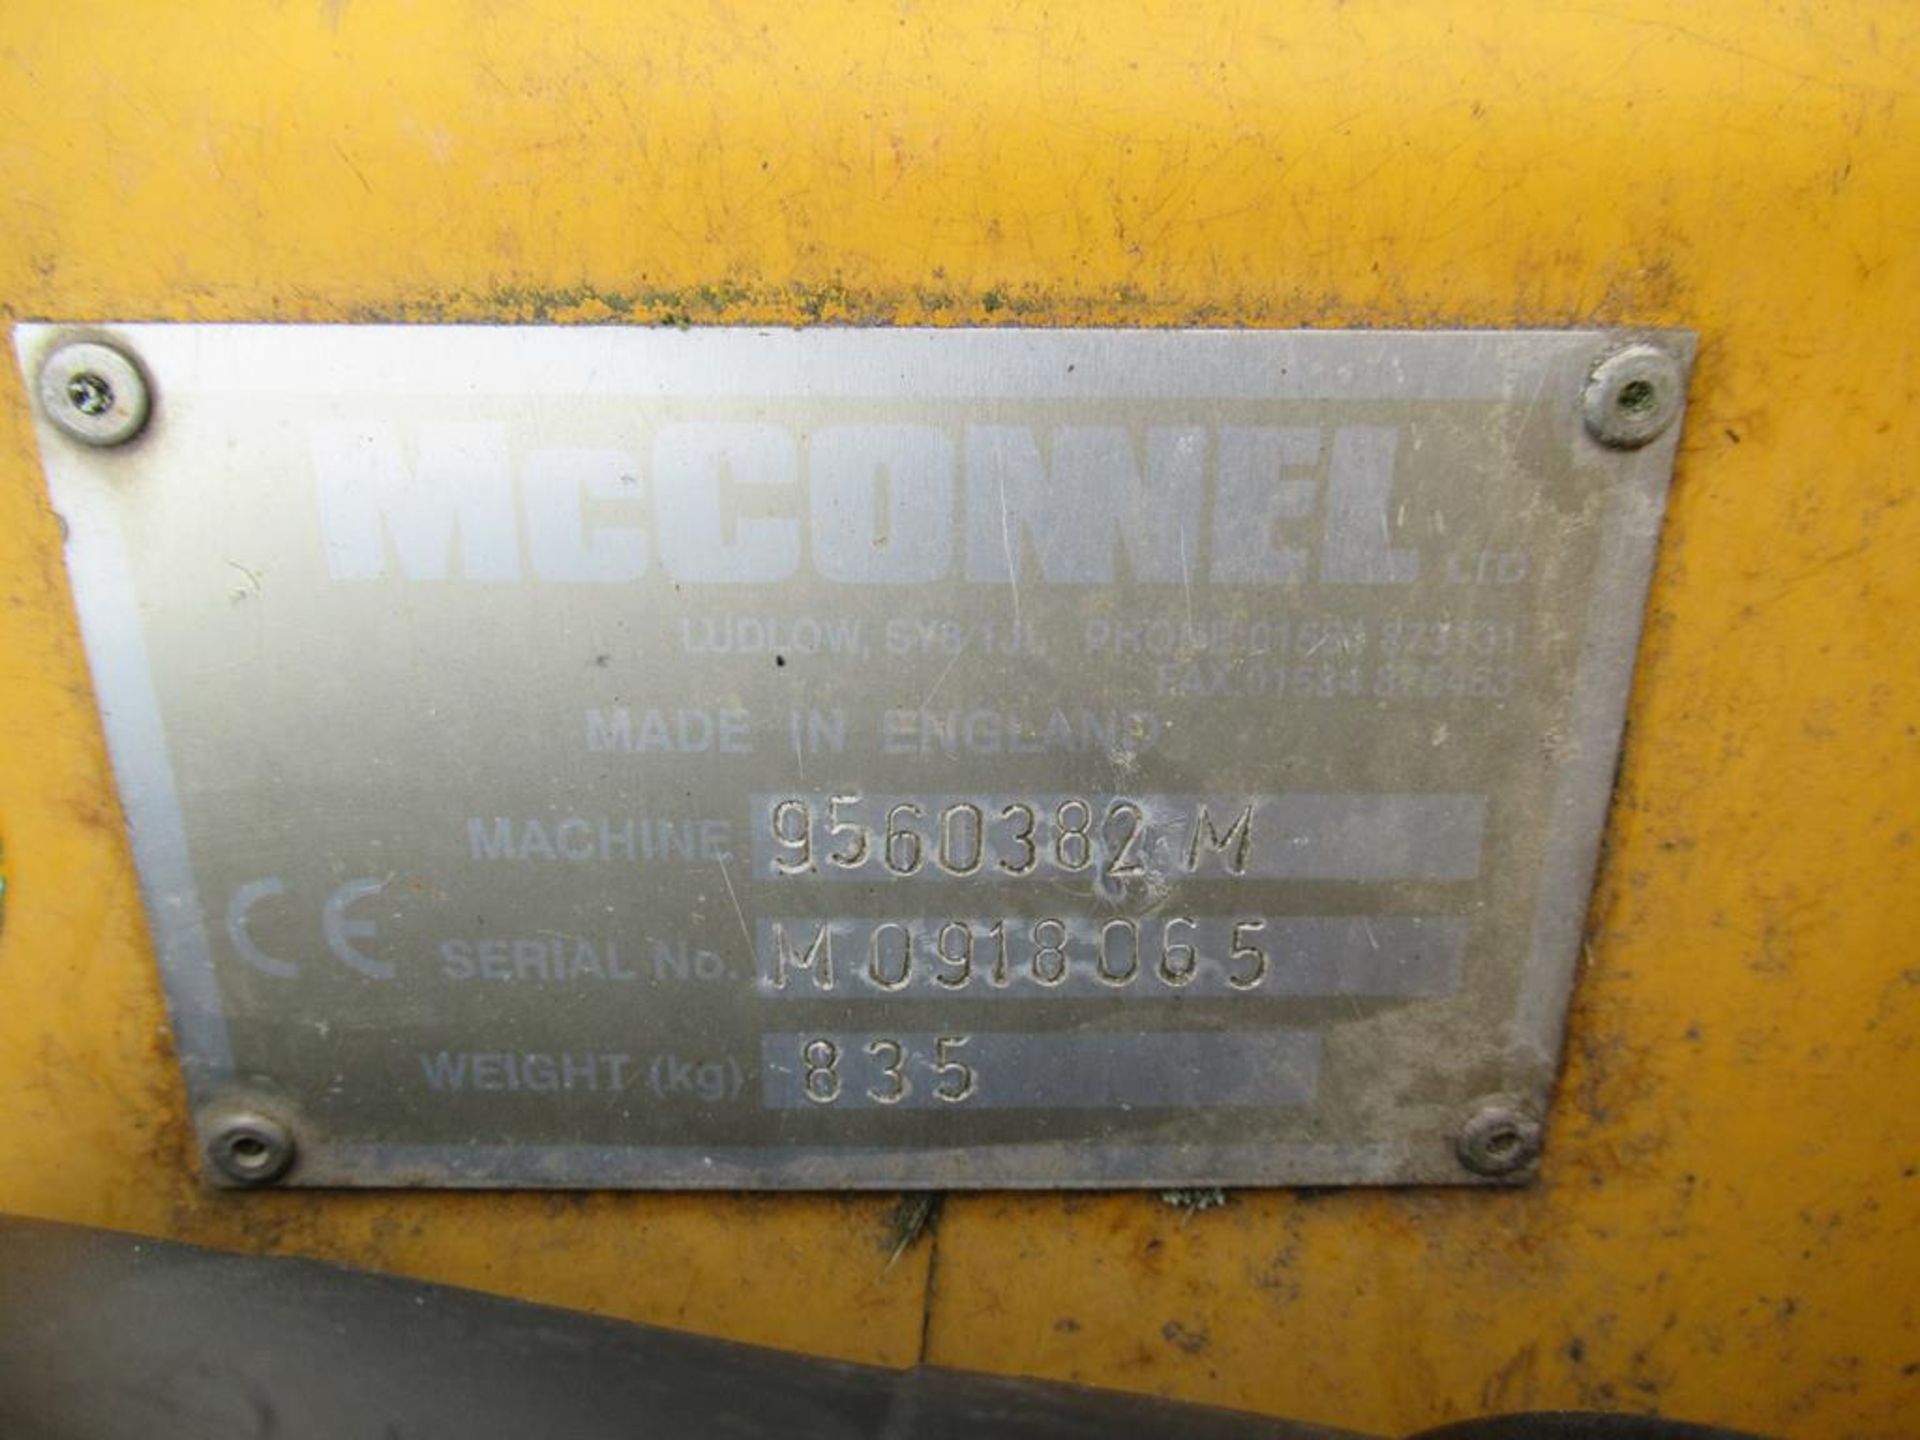 McConnel Merlin Xtreme 2500 Flail Mower - Image 8 of 10